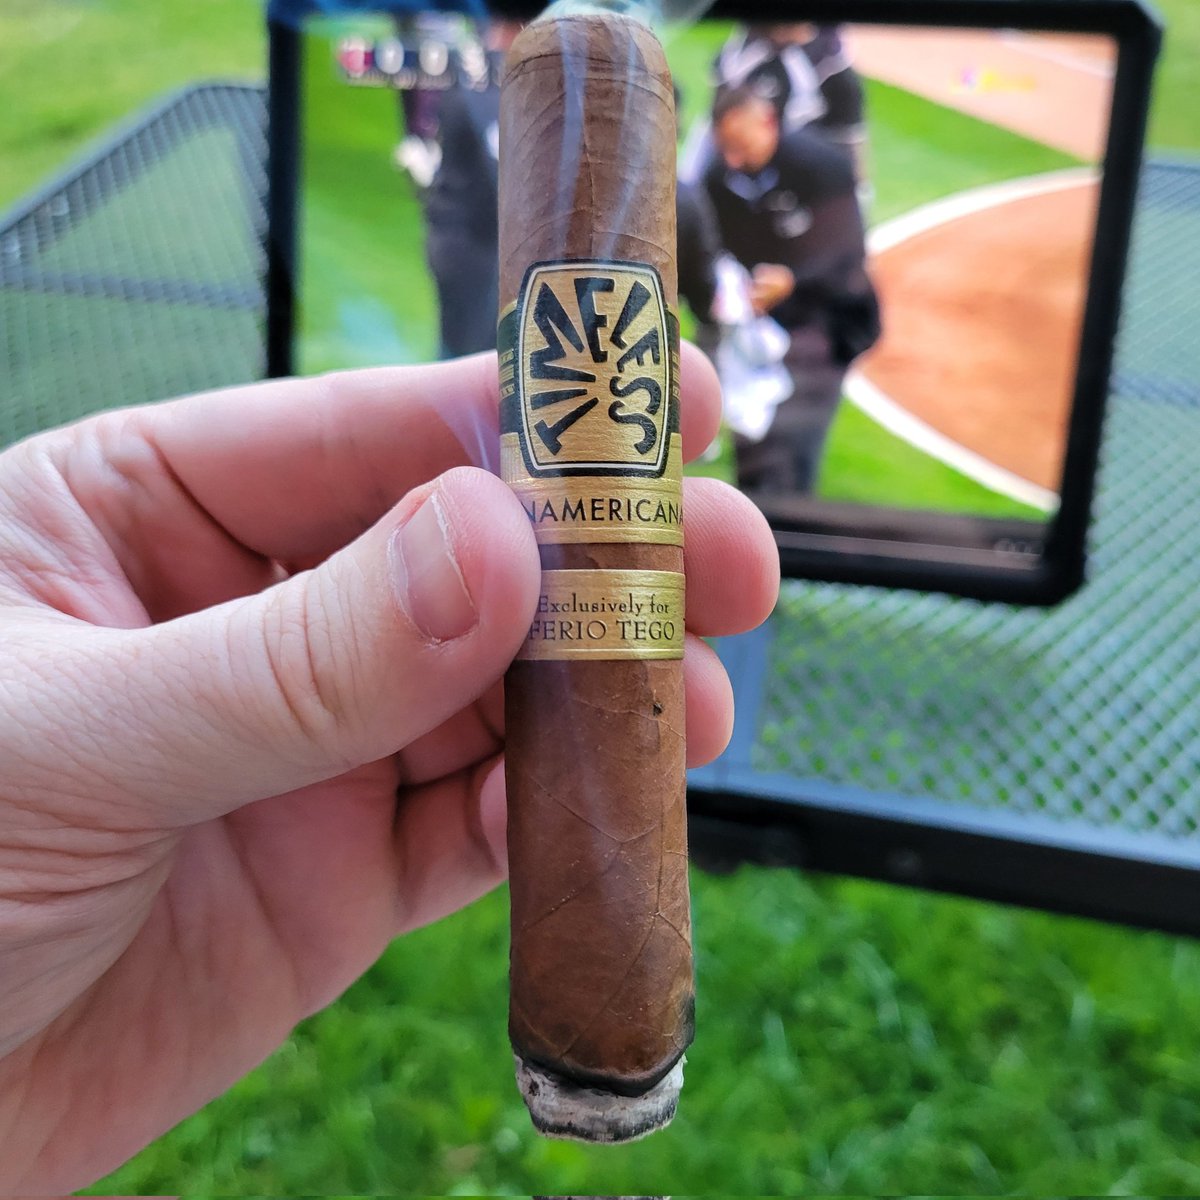 Enjoying this beautiful Ferio Tego Timeless Panamericana Cigar with the #WhiteSox game this evening. #CigarTime 💨